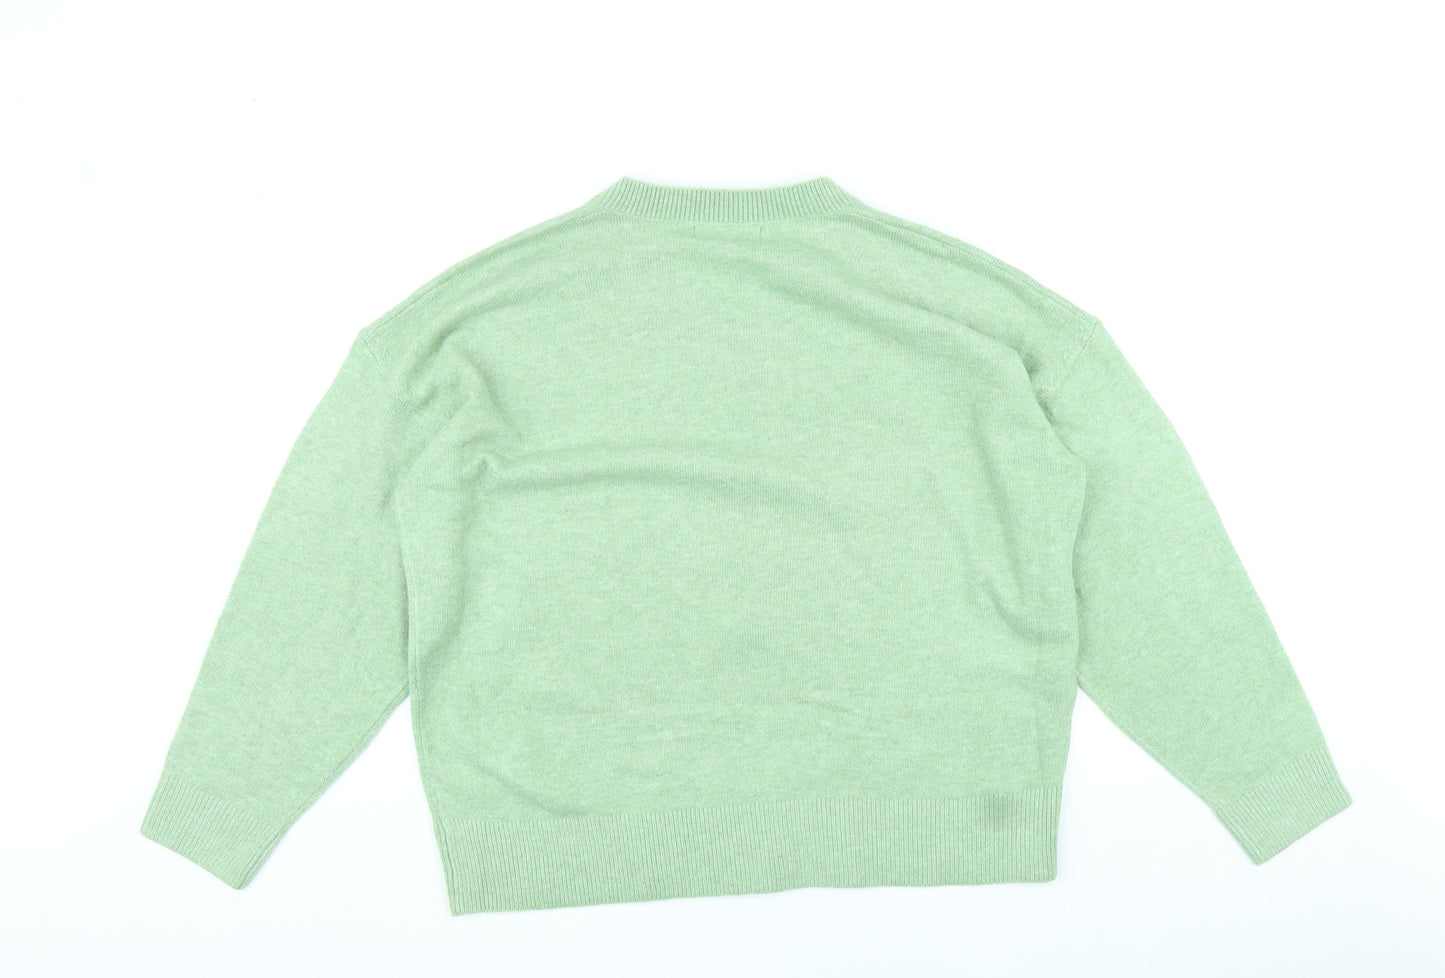 Marks and Spencer Womens Green V-Neck Polyester Pullover Jumper Size L